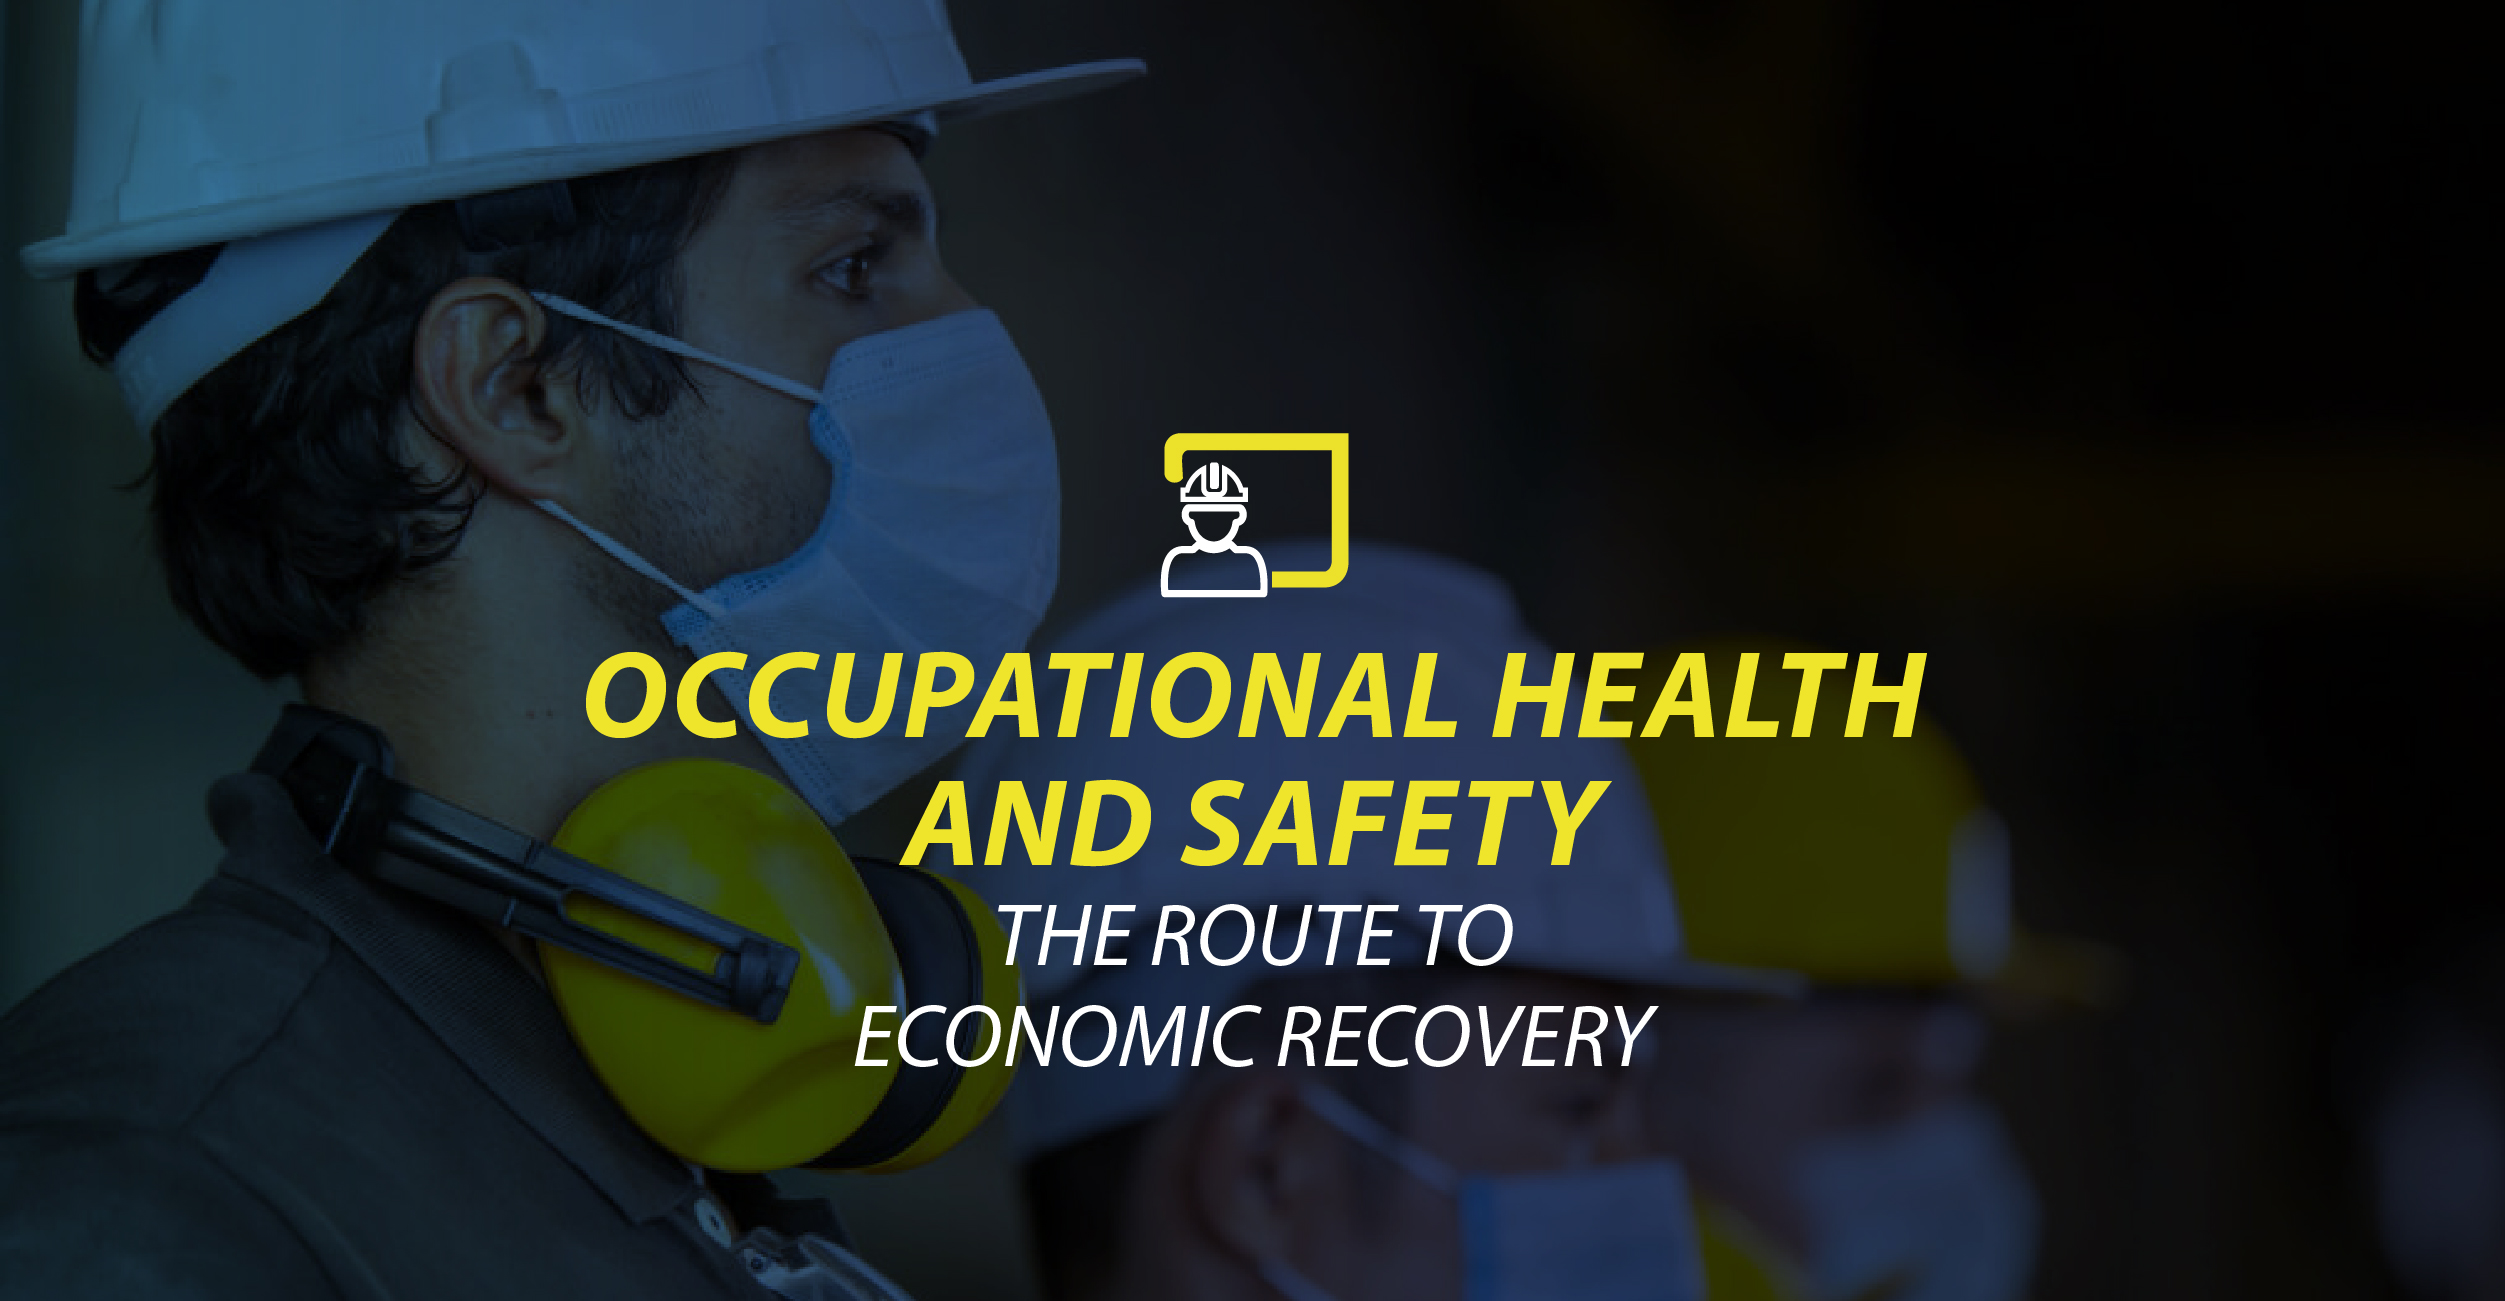 Occupational Health and Safety, the route to economic recovery.